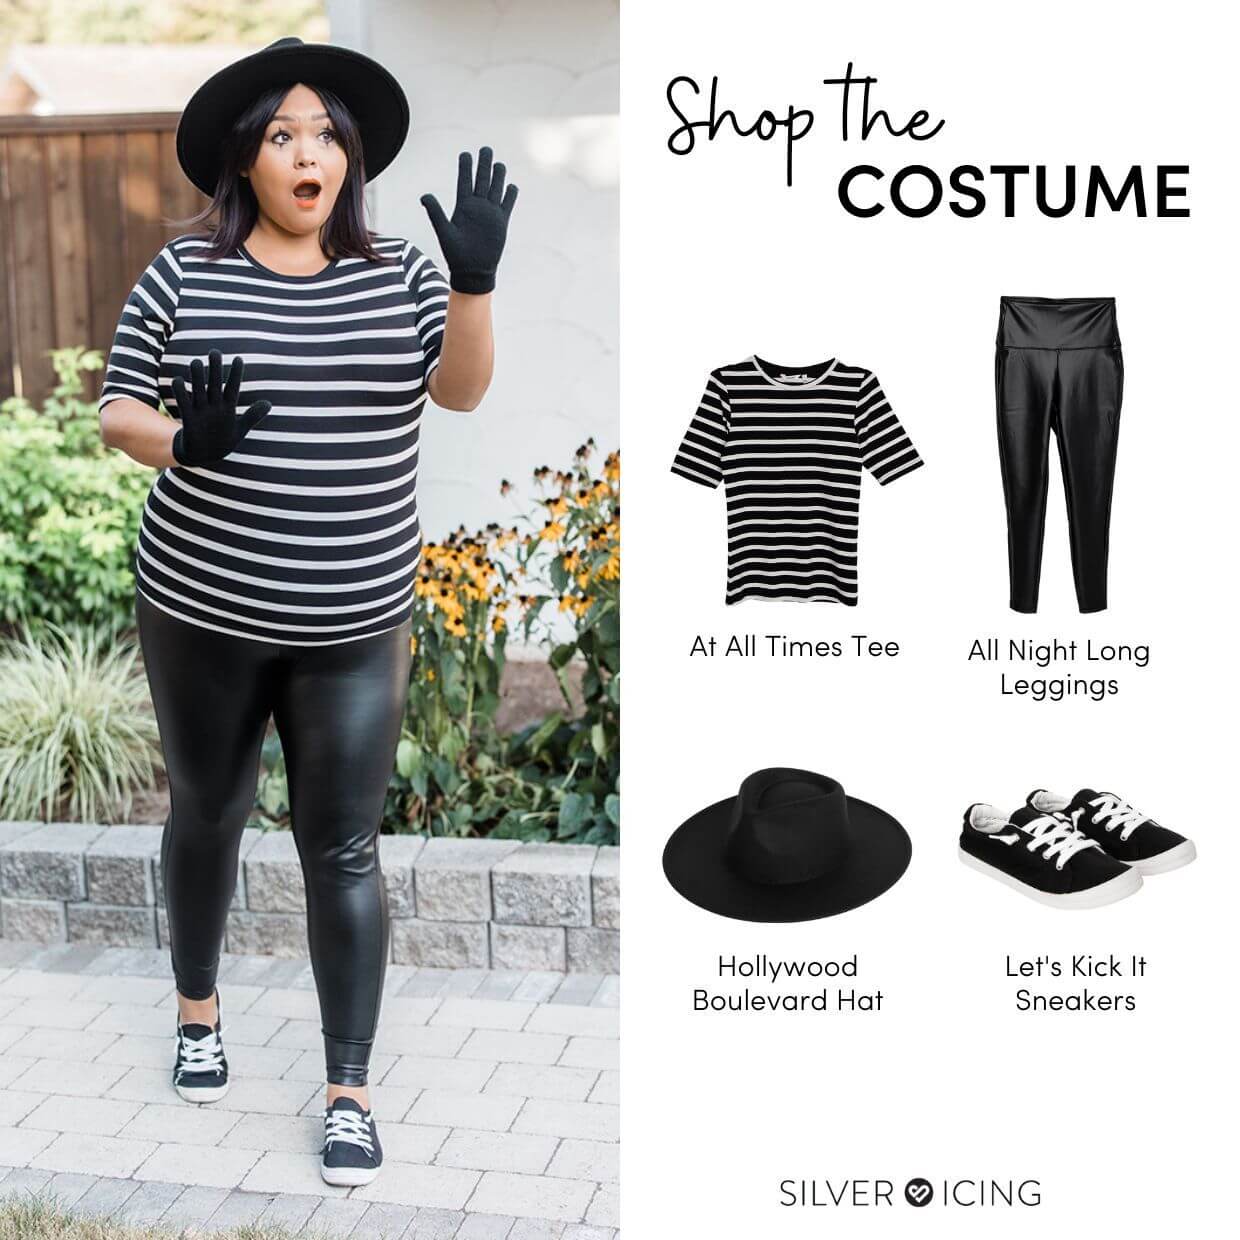 Silver Icing Product Feature Spotlight: Halloween Outfit Ideas